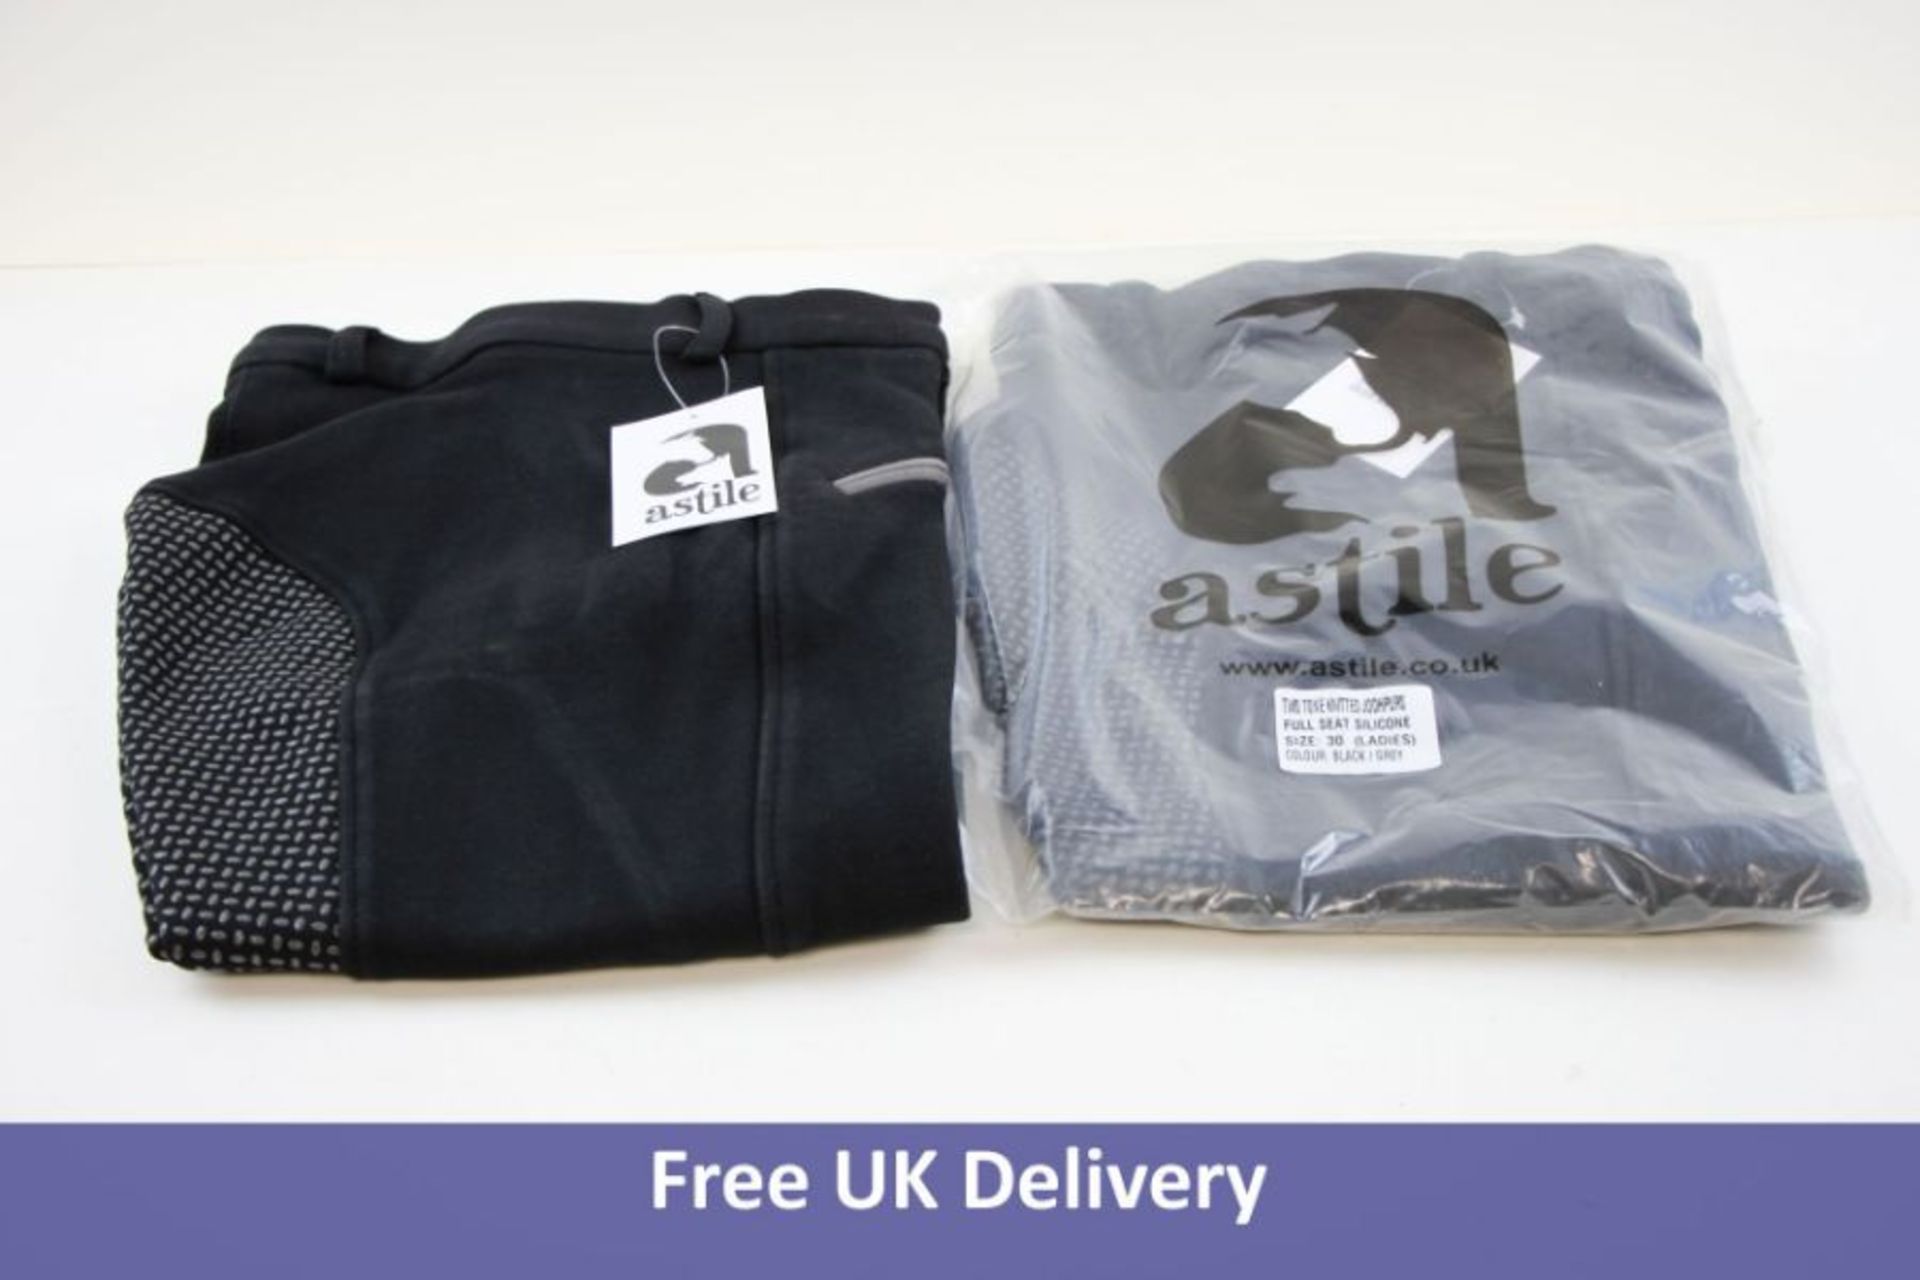 Two Pairs of Astile Women's Equestrian Riding Trousers, Full Seat Silicone, Black and Grey, Size 30